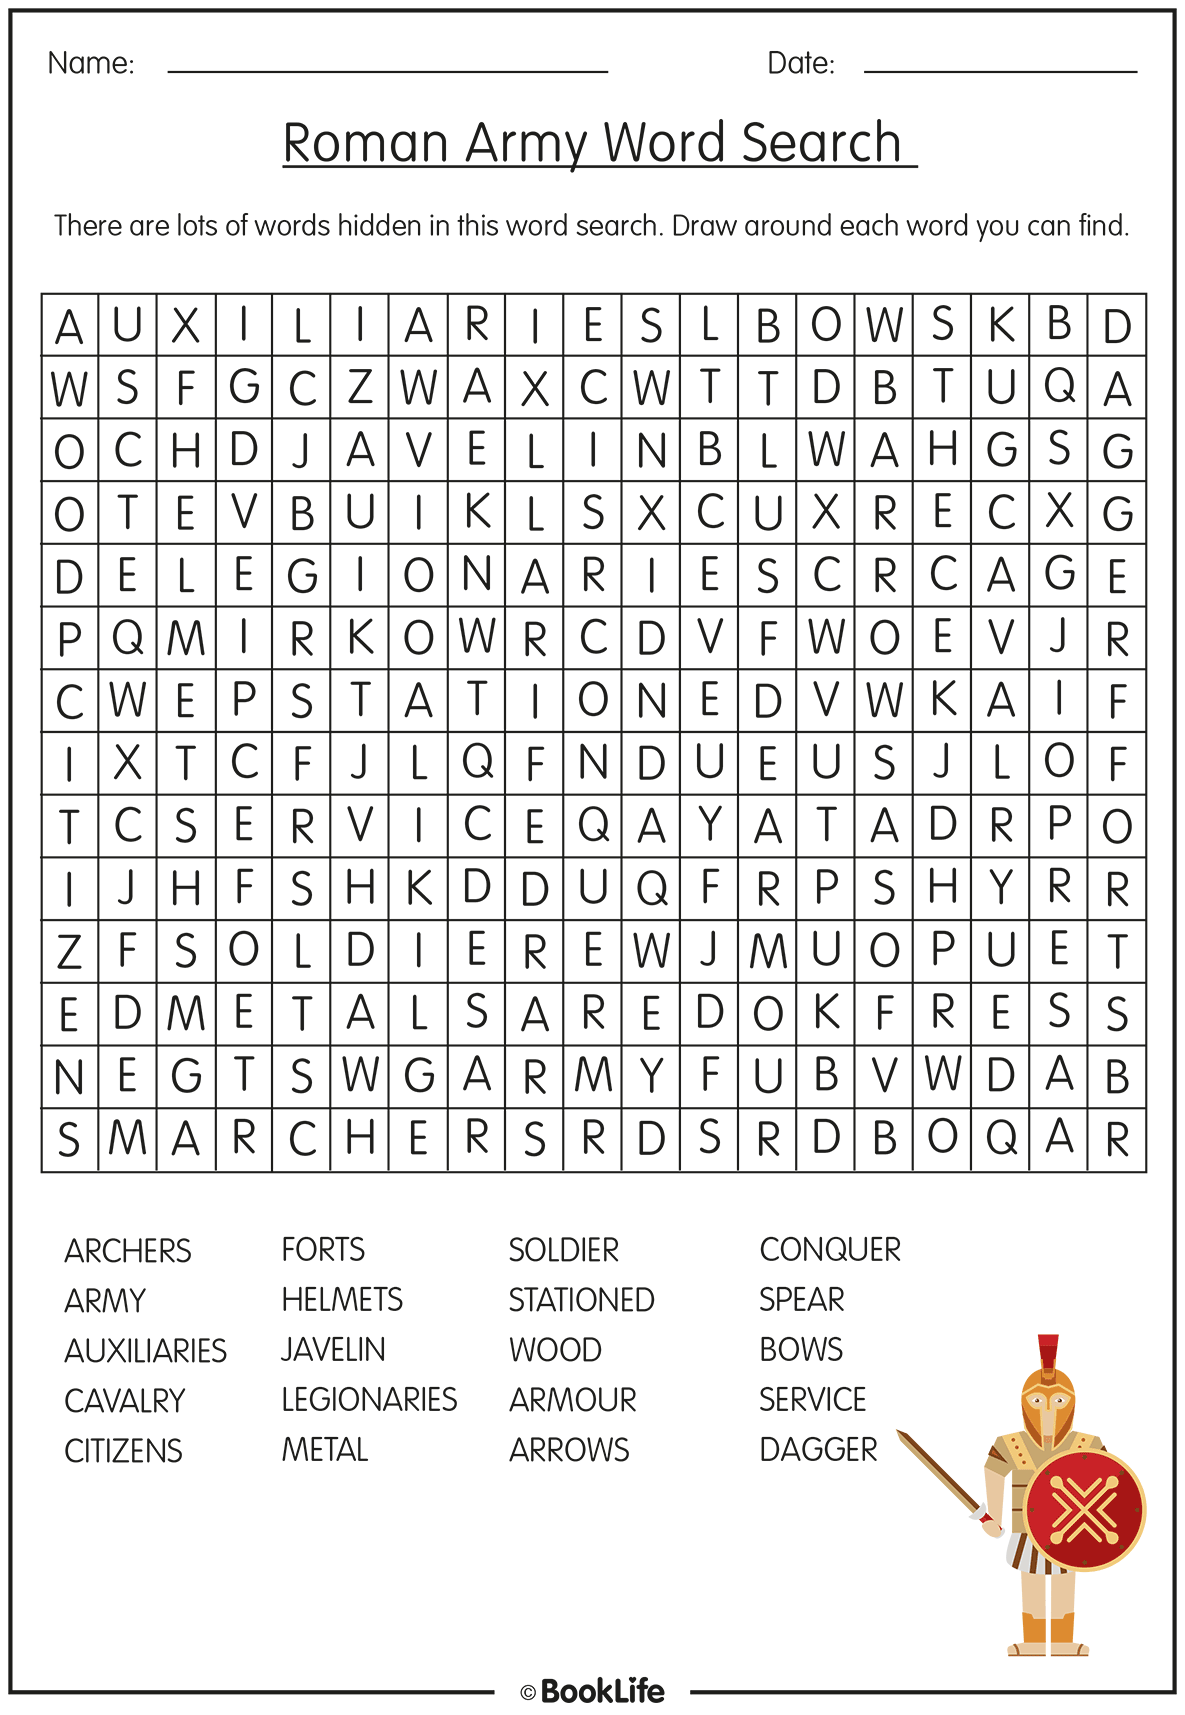 Roman Army Word Search by BookLife